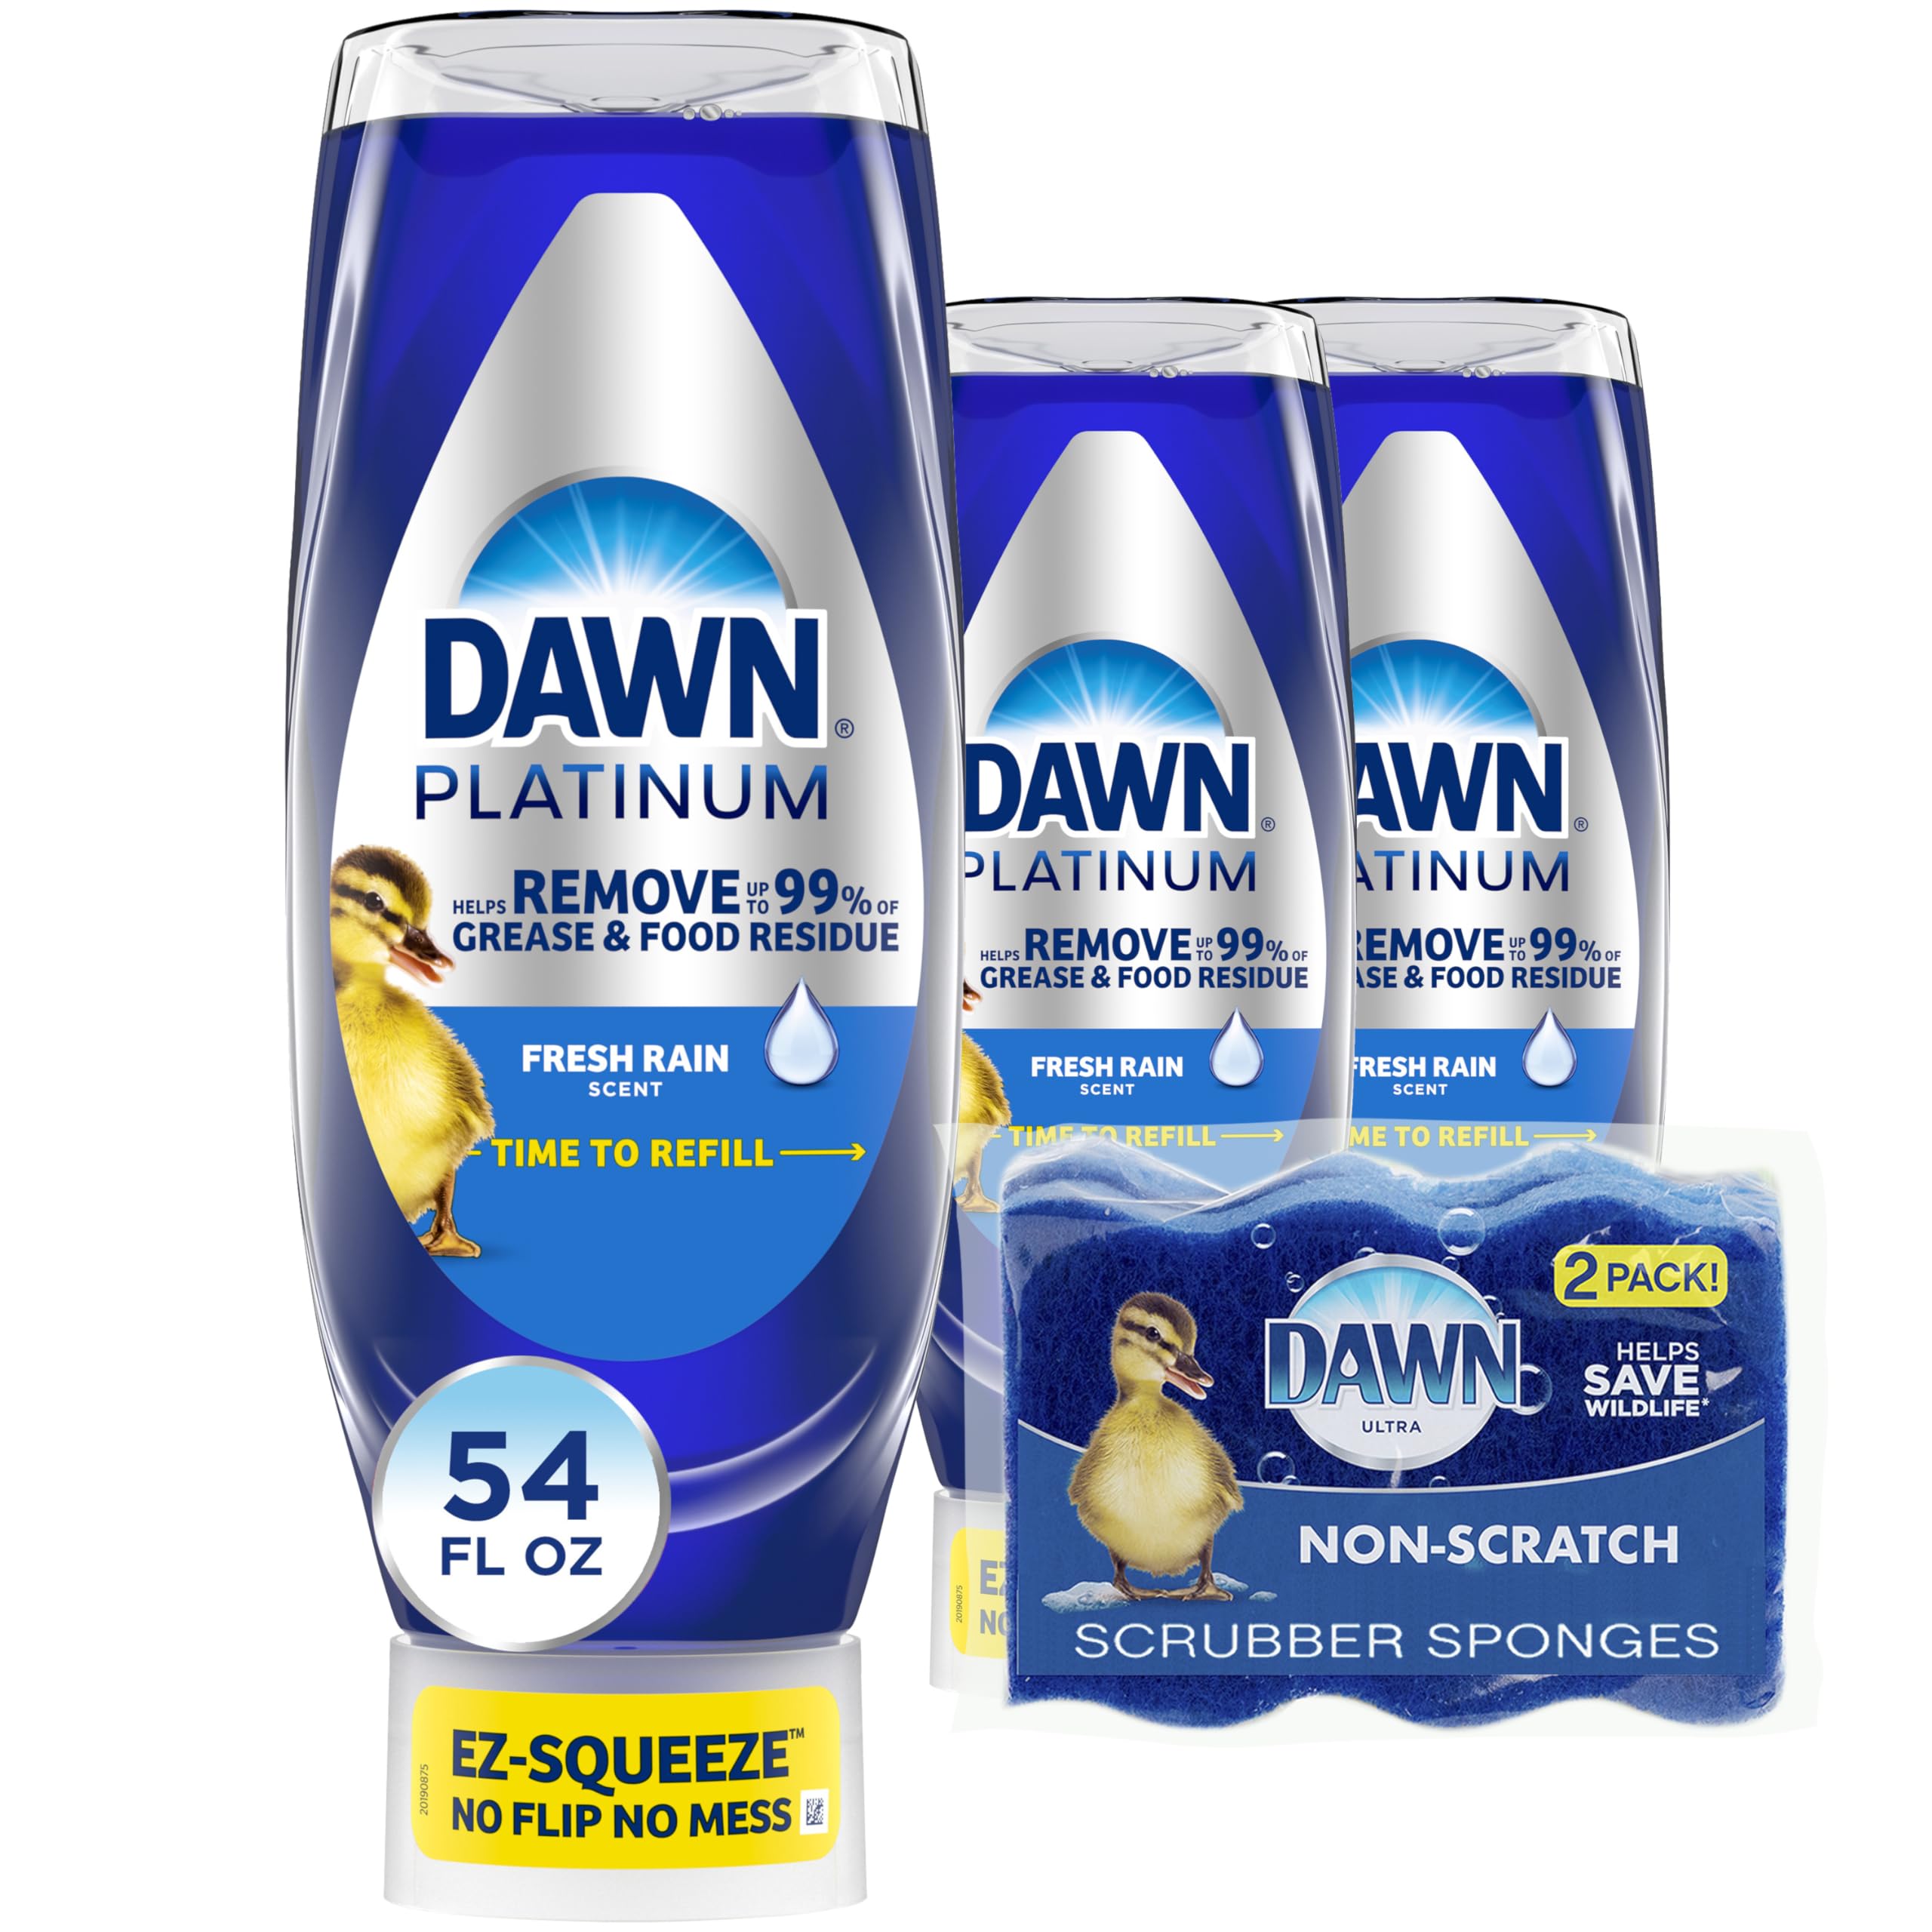 Prime Members: 3-Pack 18-Oz Dawn EZ-Squeeze Platinum Dishwashing Soap + 2 Non-Scratch Sponges $13.15 w/ S&S + Free Shipping w/ Prime or on $35+